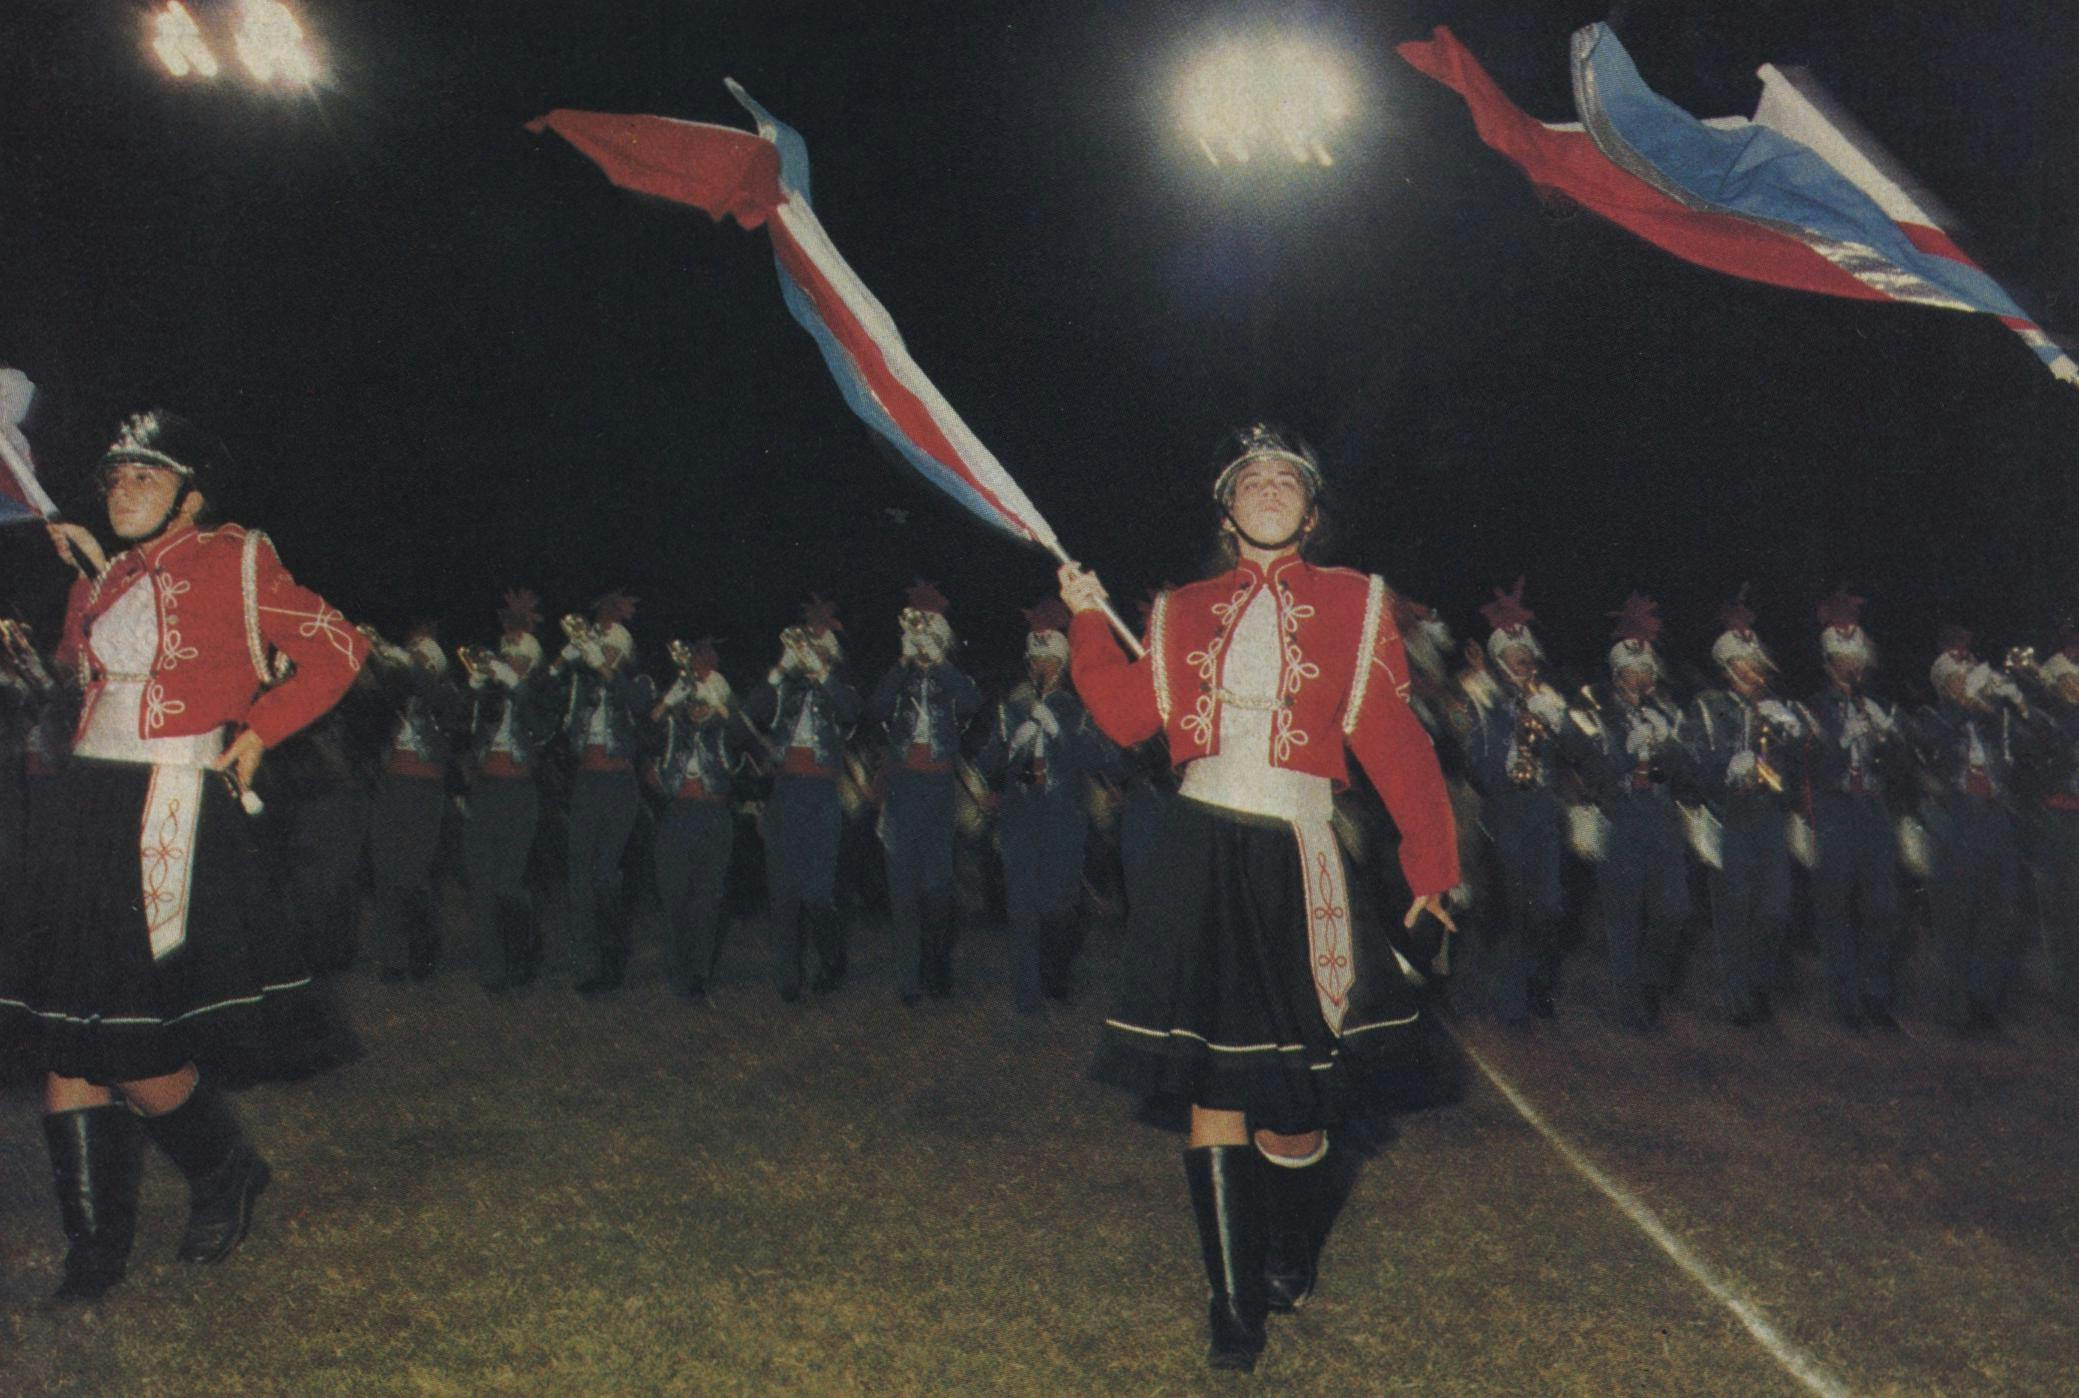 The flag bearers of neighboring Pearce High School strut arrogantly downfield. Note the asymmetry of their arms—bad form.